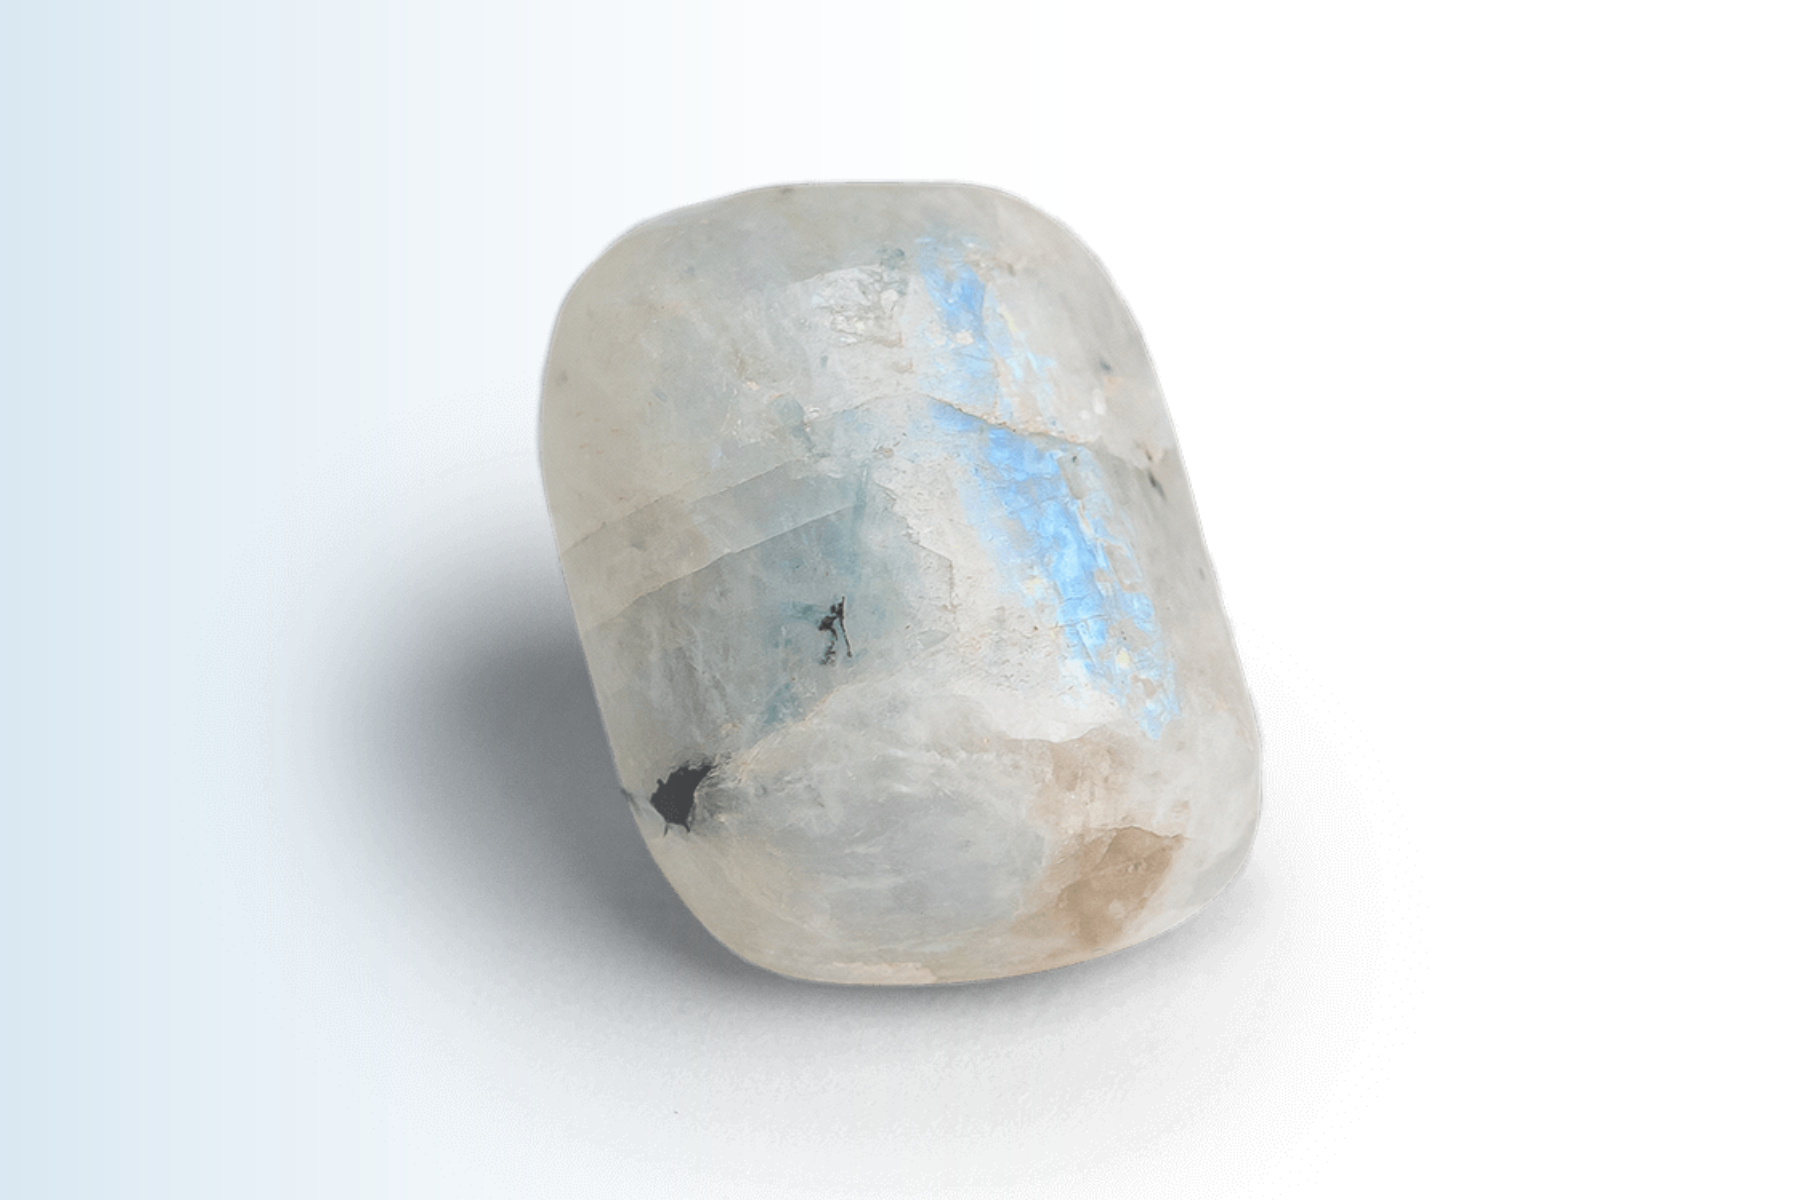 Moonstone set within a pure white rock